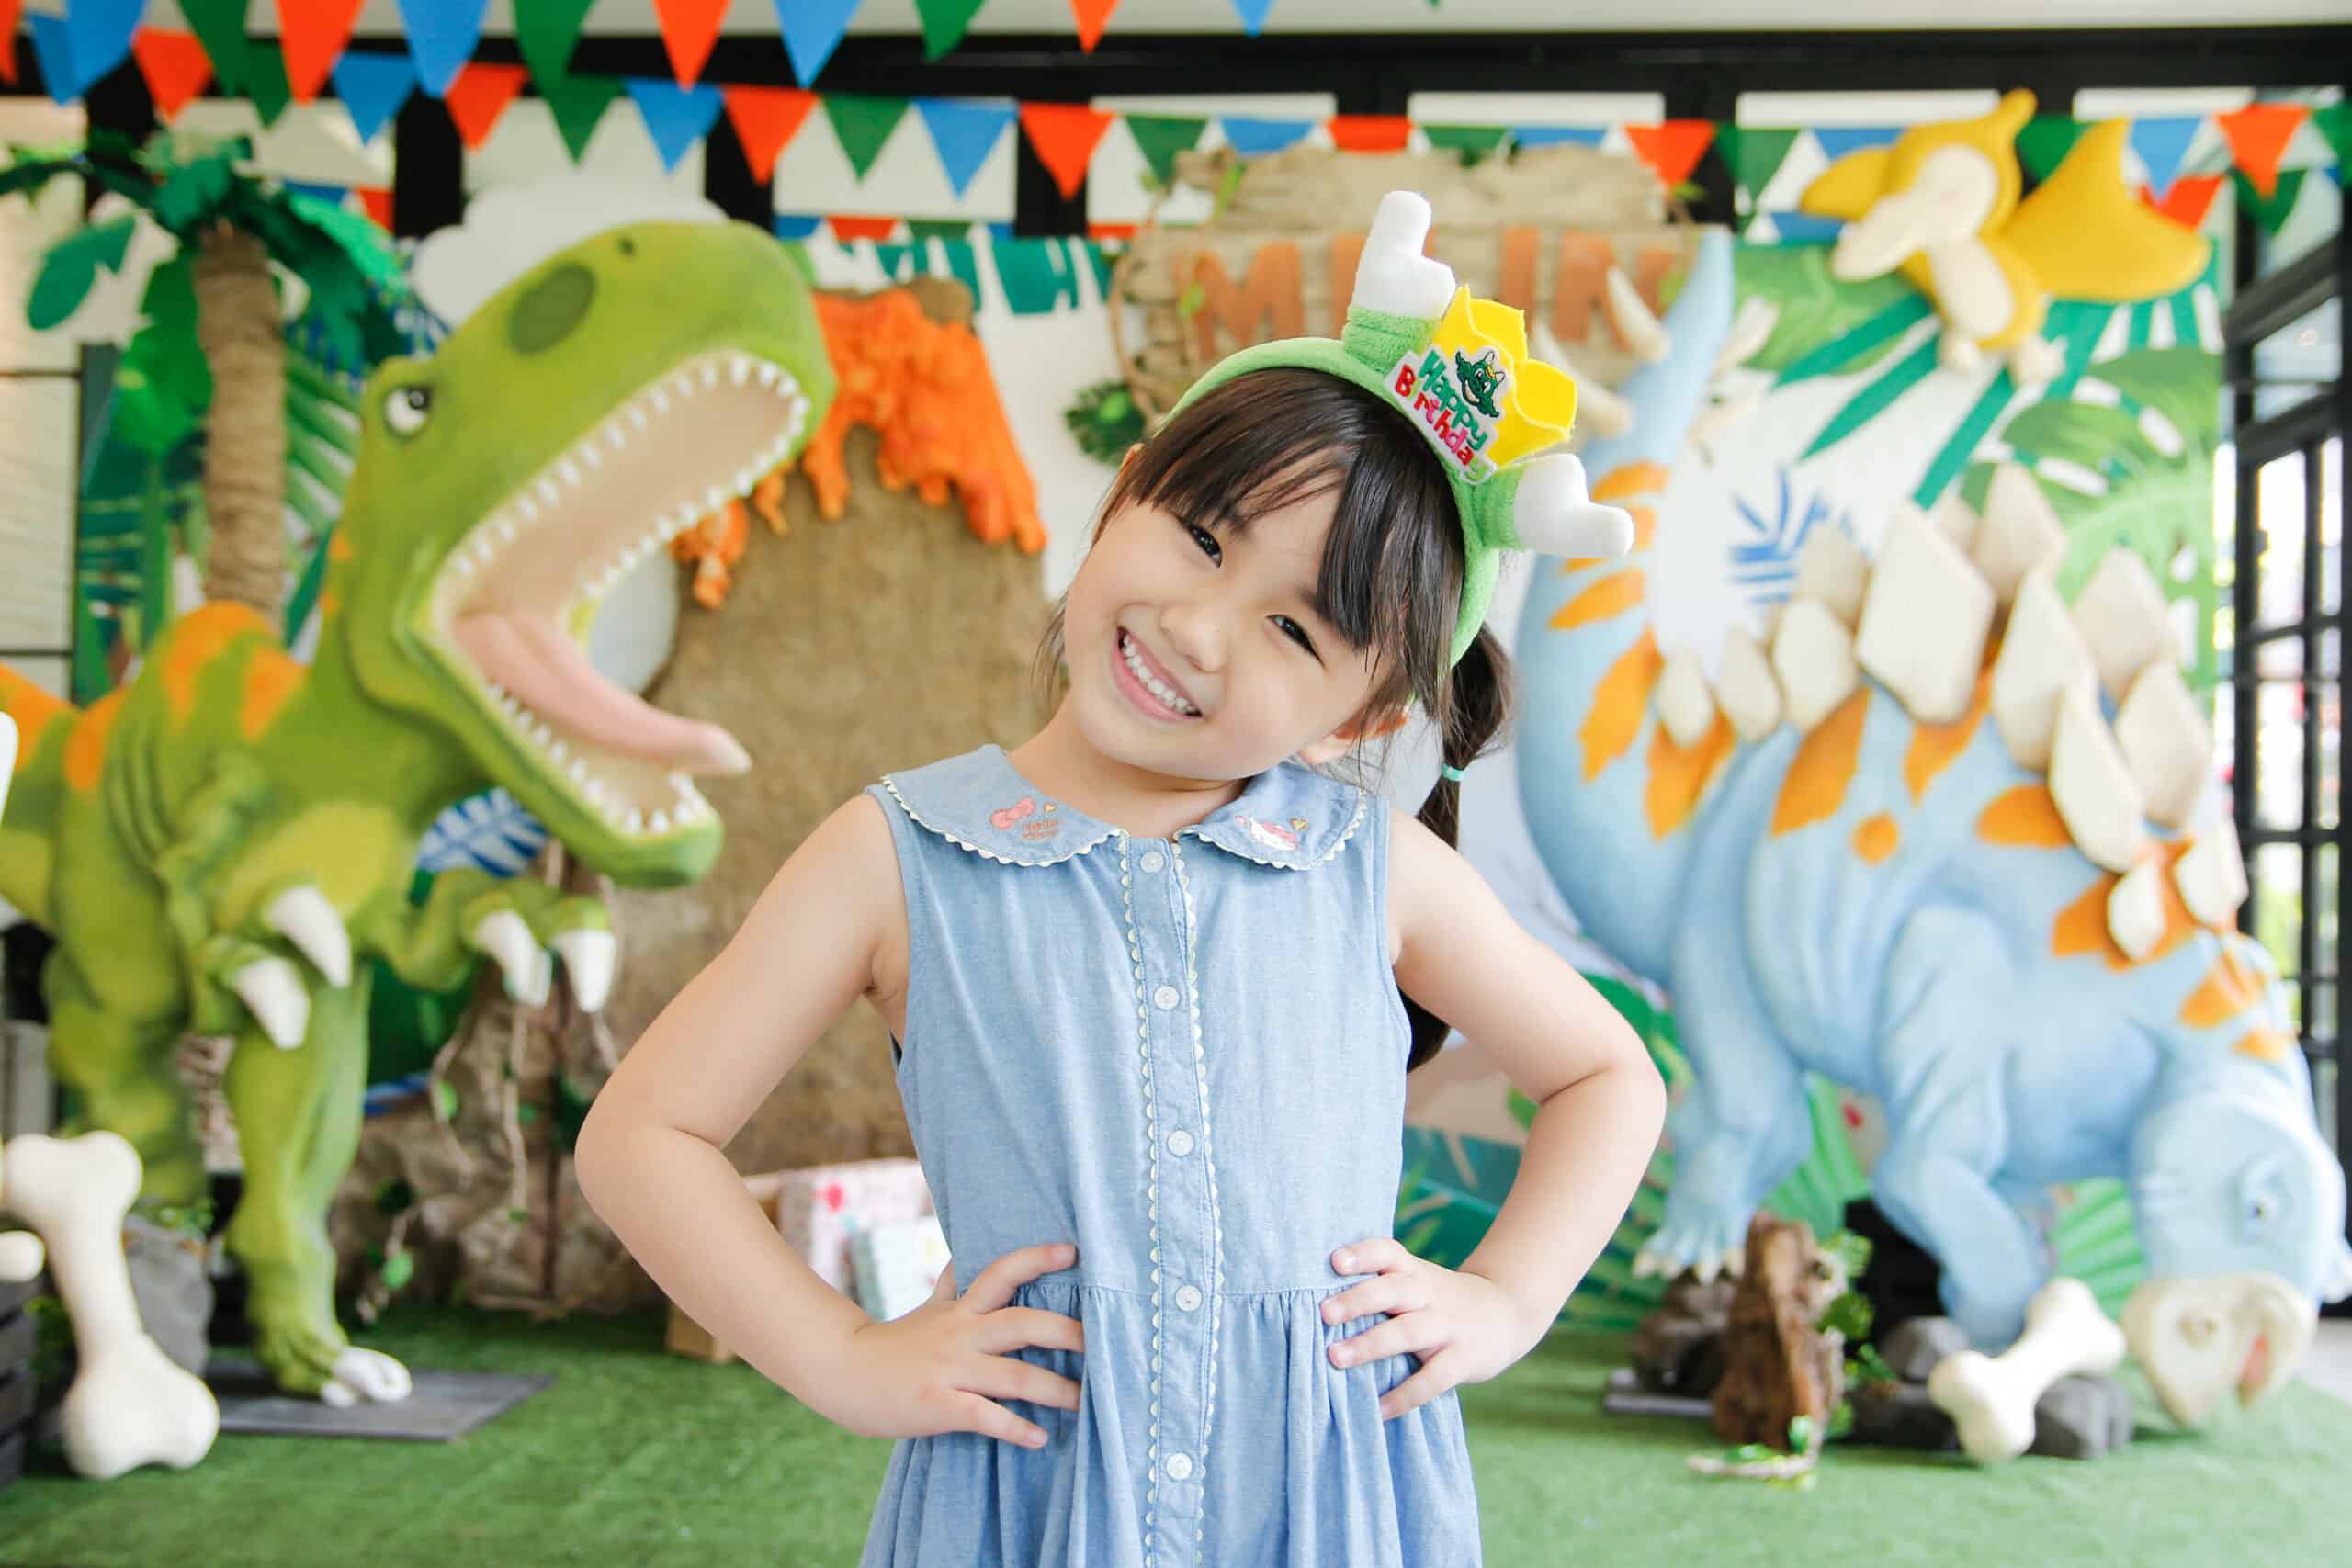 Let's roar and see our Dinosaur themed party ideas for your kids' next birthday including backdrop, balloons, party decoration, mascot and more fun stuffs!